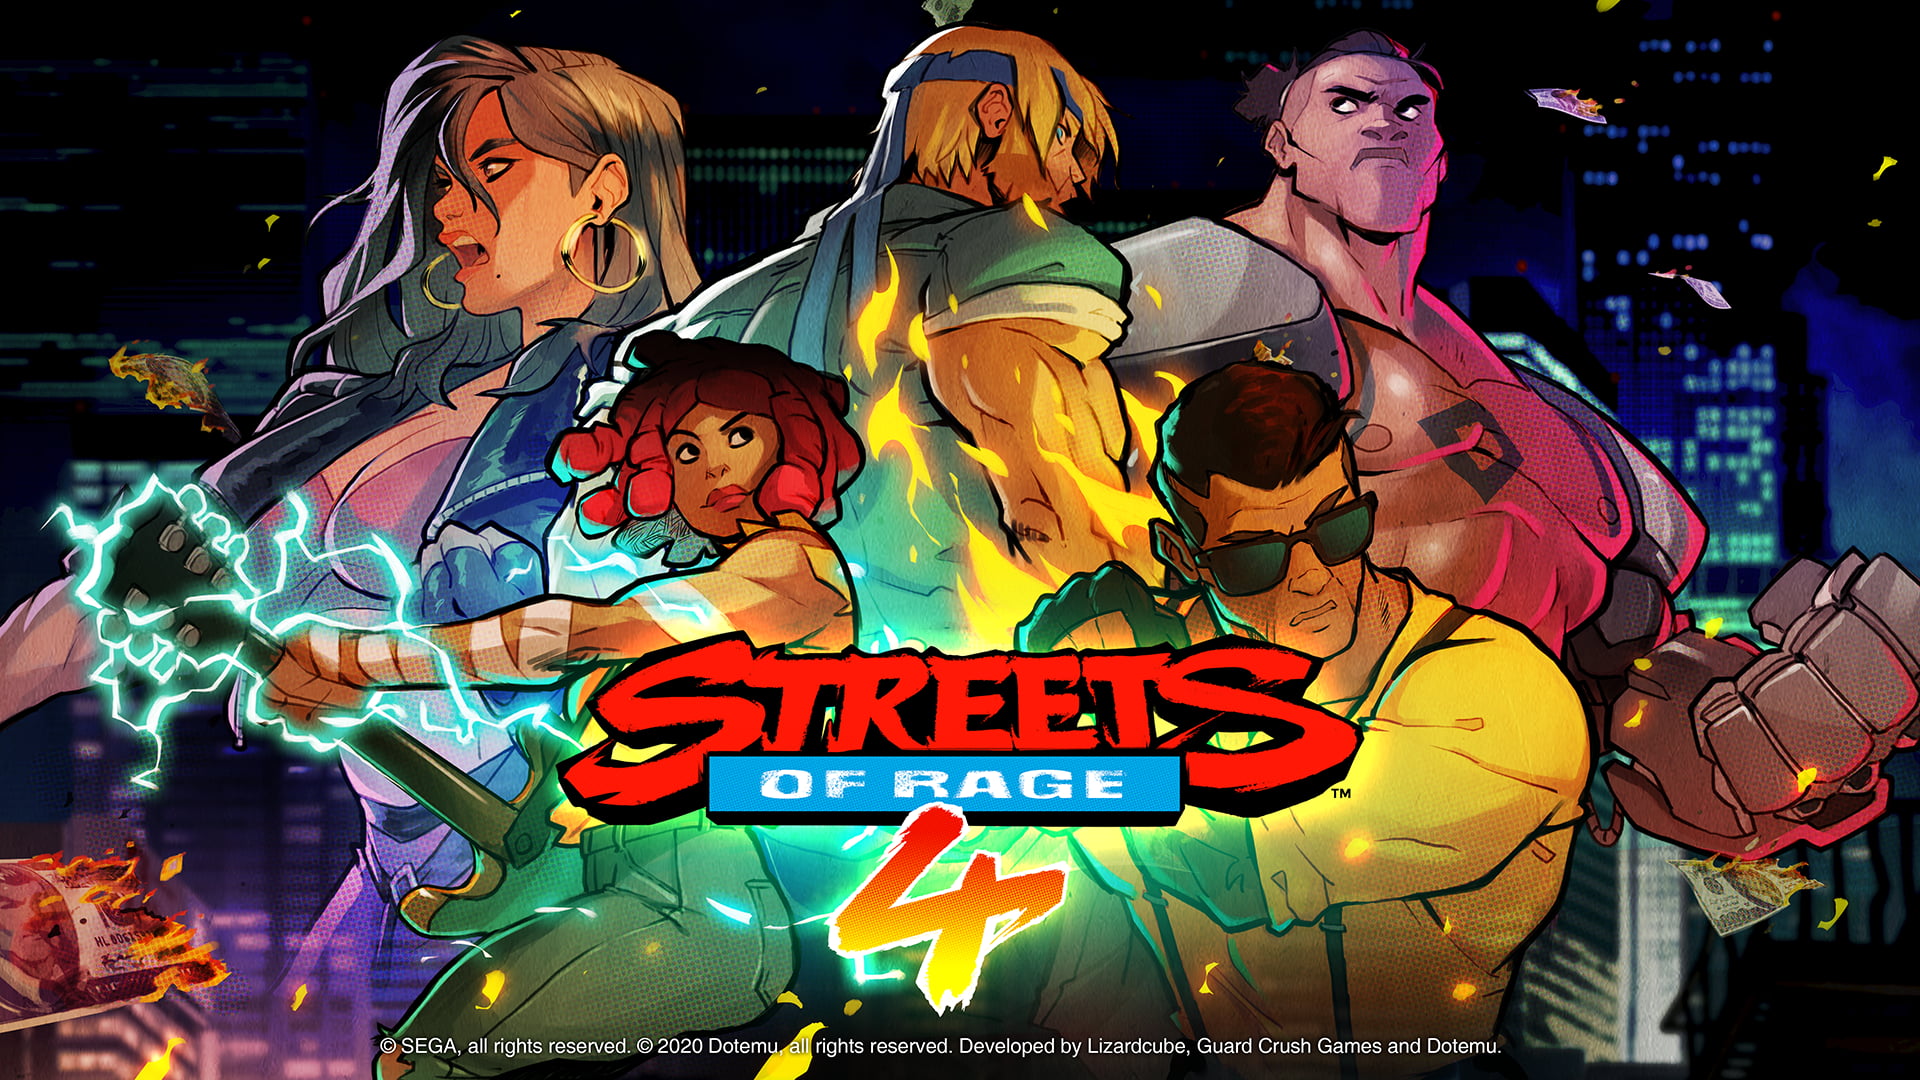 Streets of Rage, Streets of Rage 4, video game art, video games